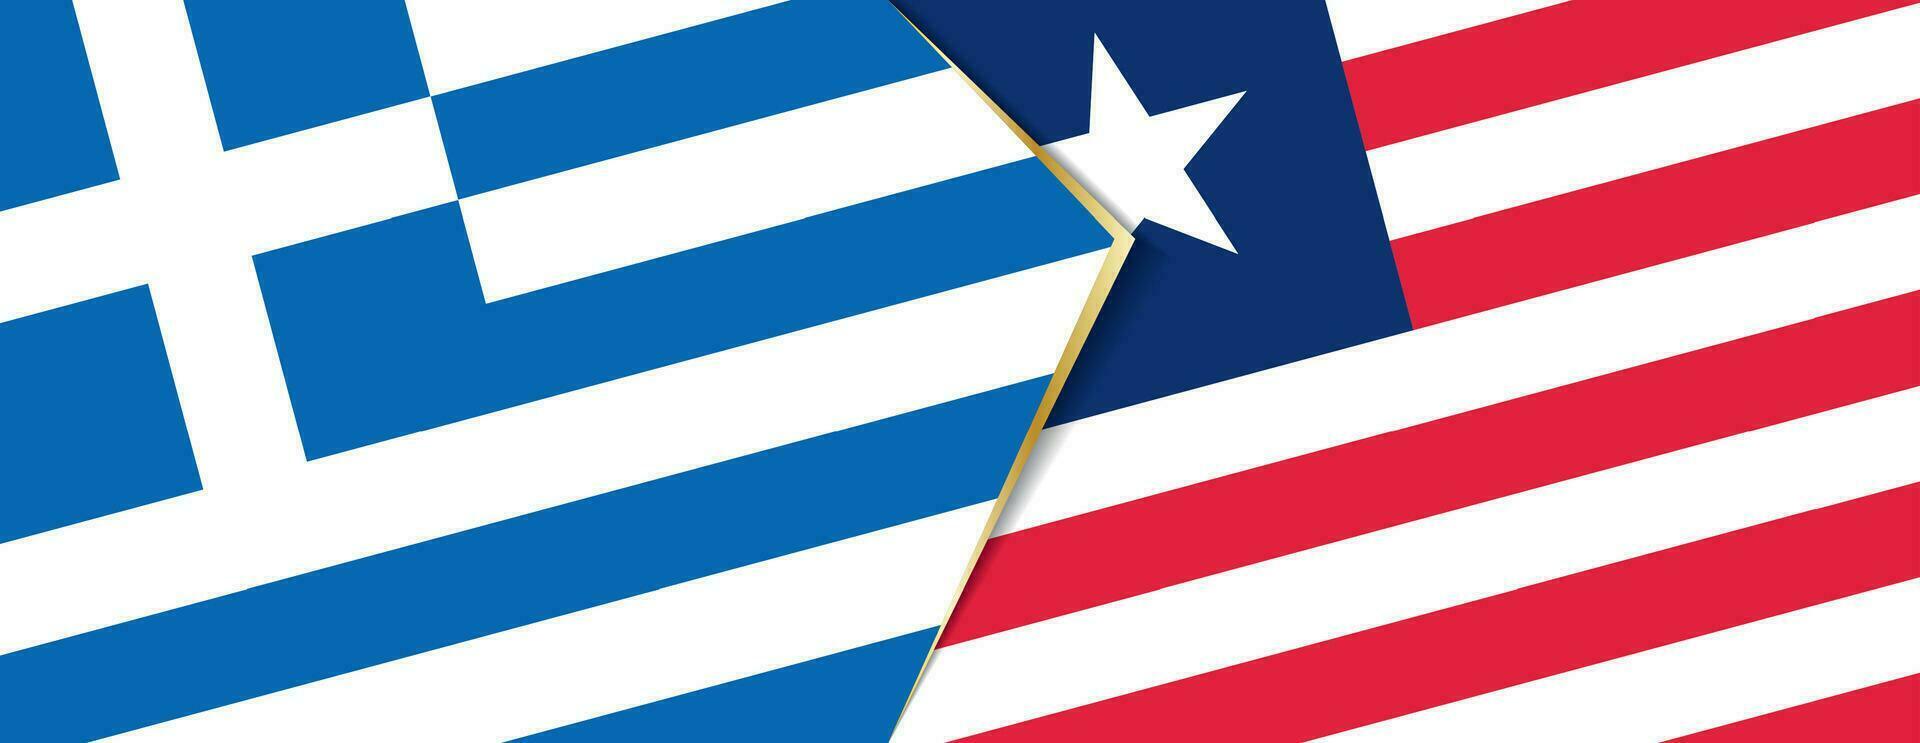 Greece and Liberia flags, two vector flags.